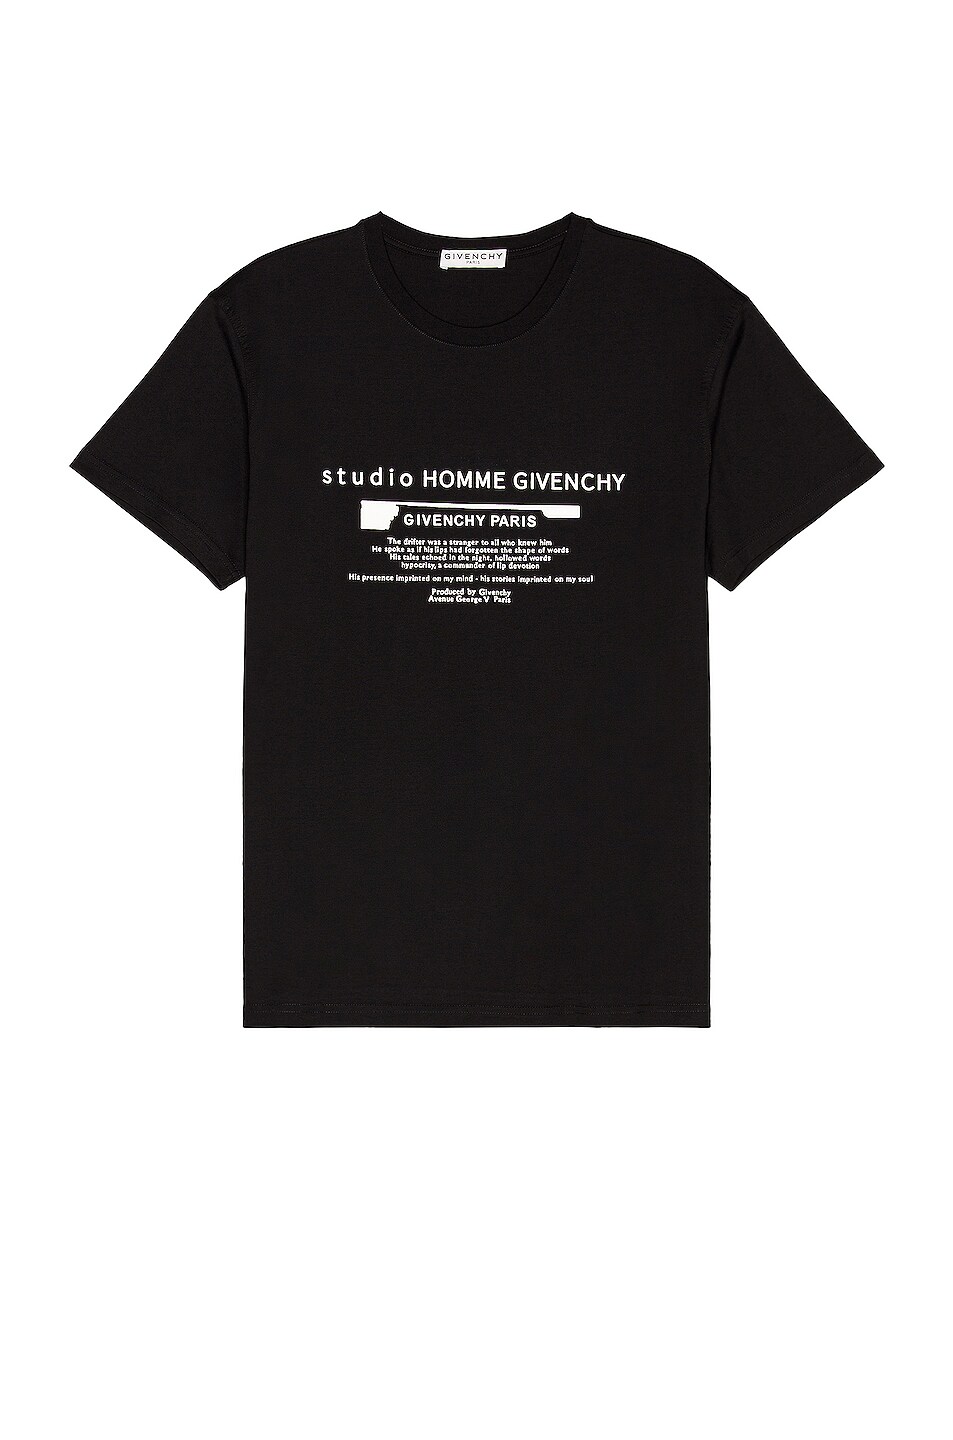 Image 1 of Givenchy Studio Homme Tee in Black